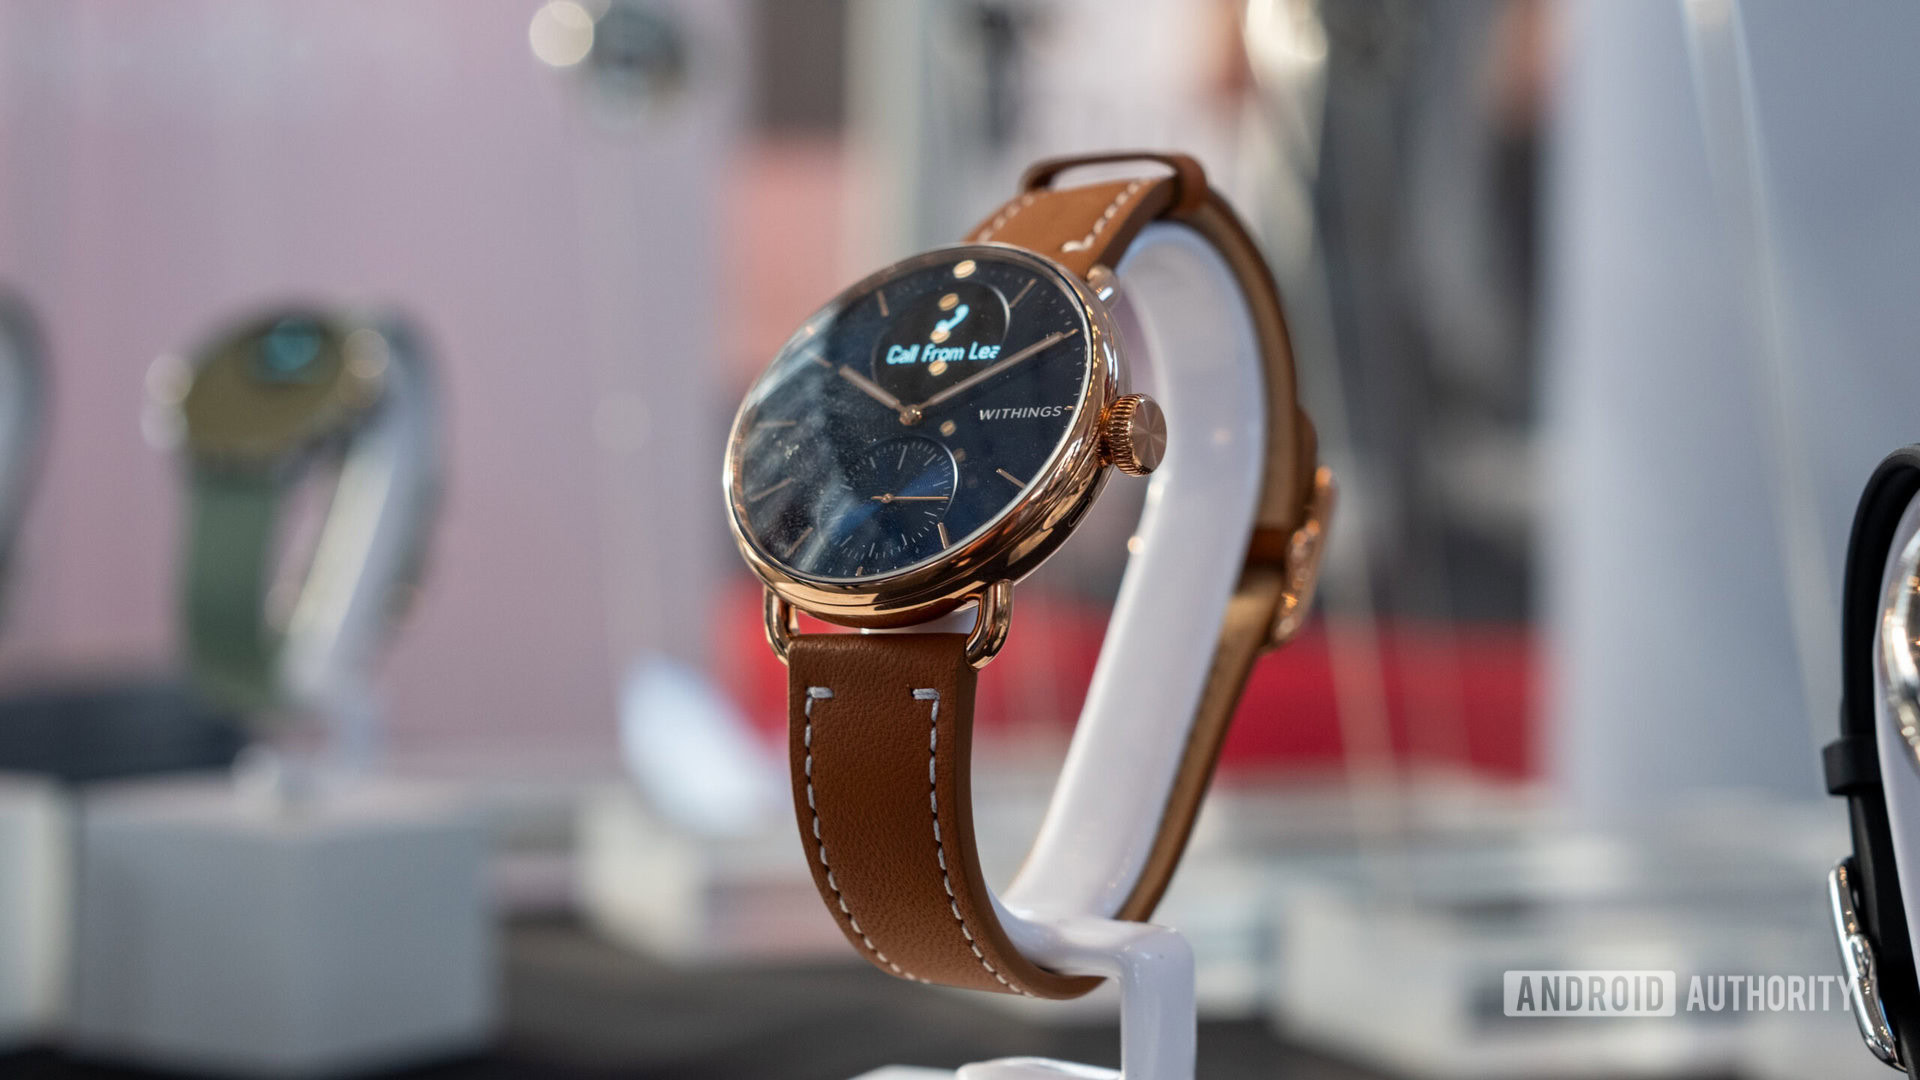 Withings Develops The World's Most Advanced Health-Tracking Watch | Onshape